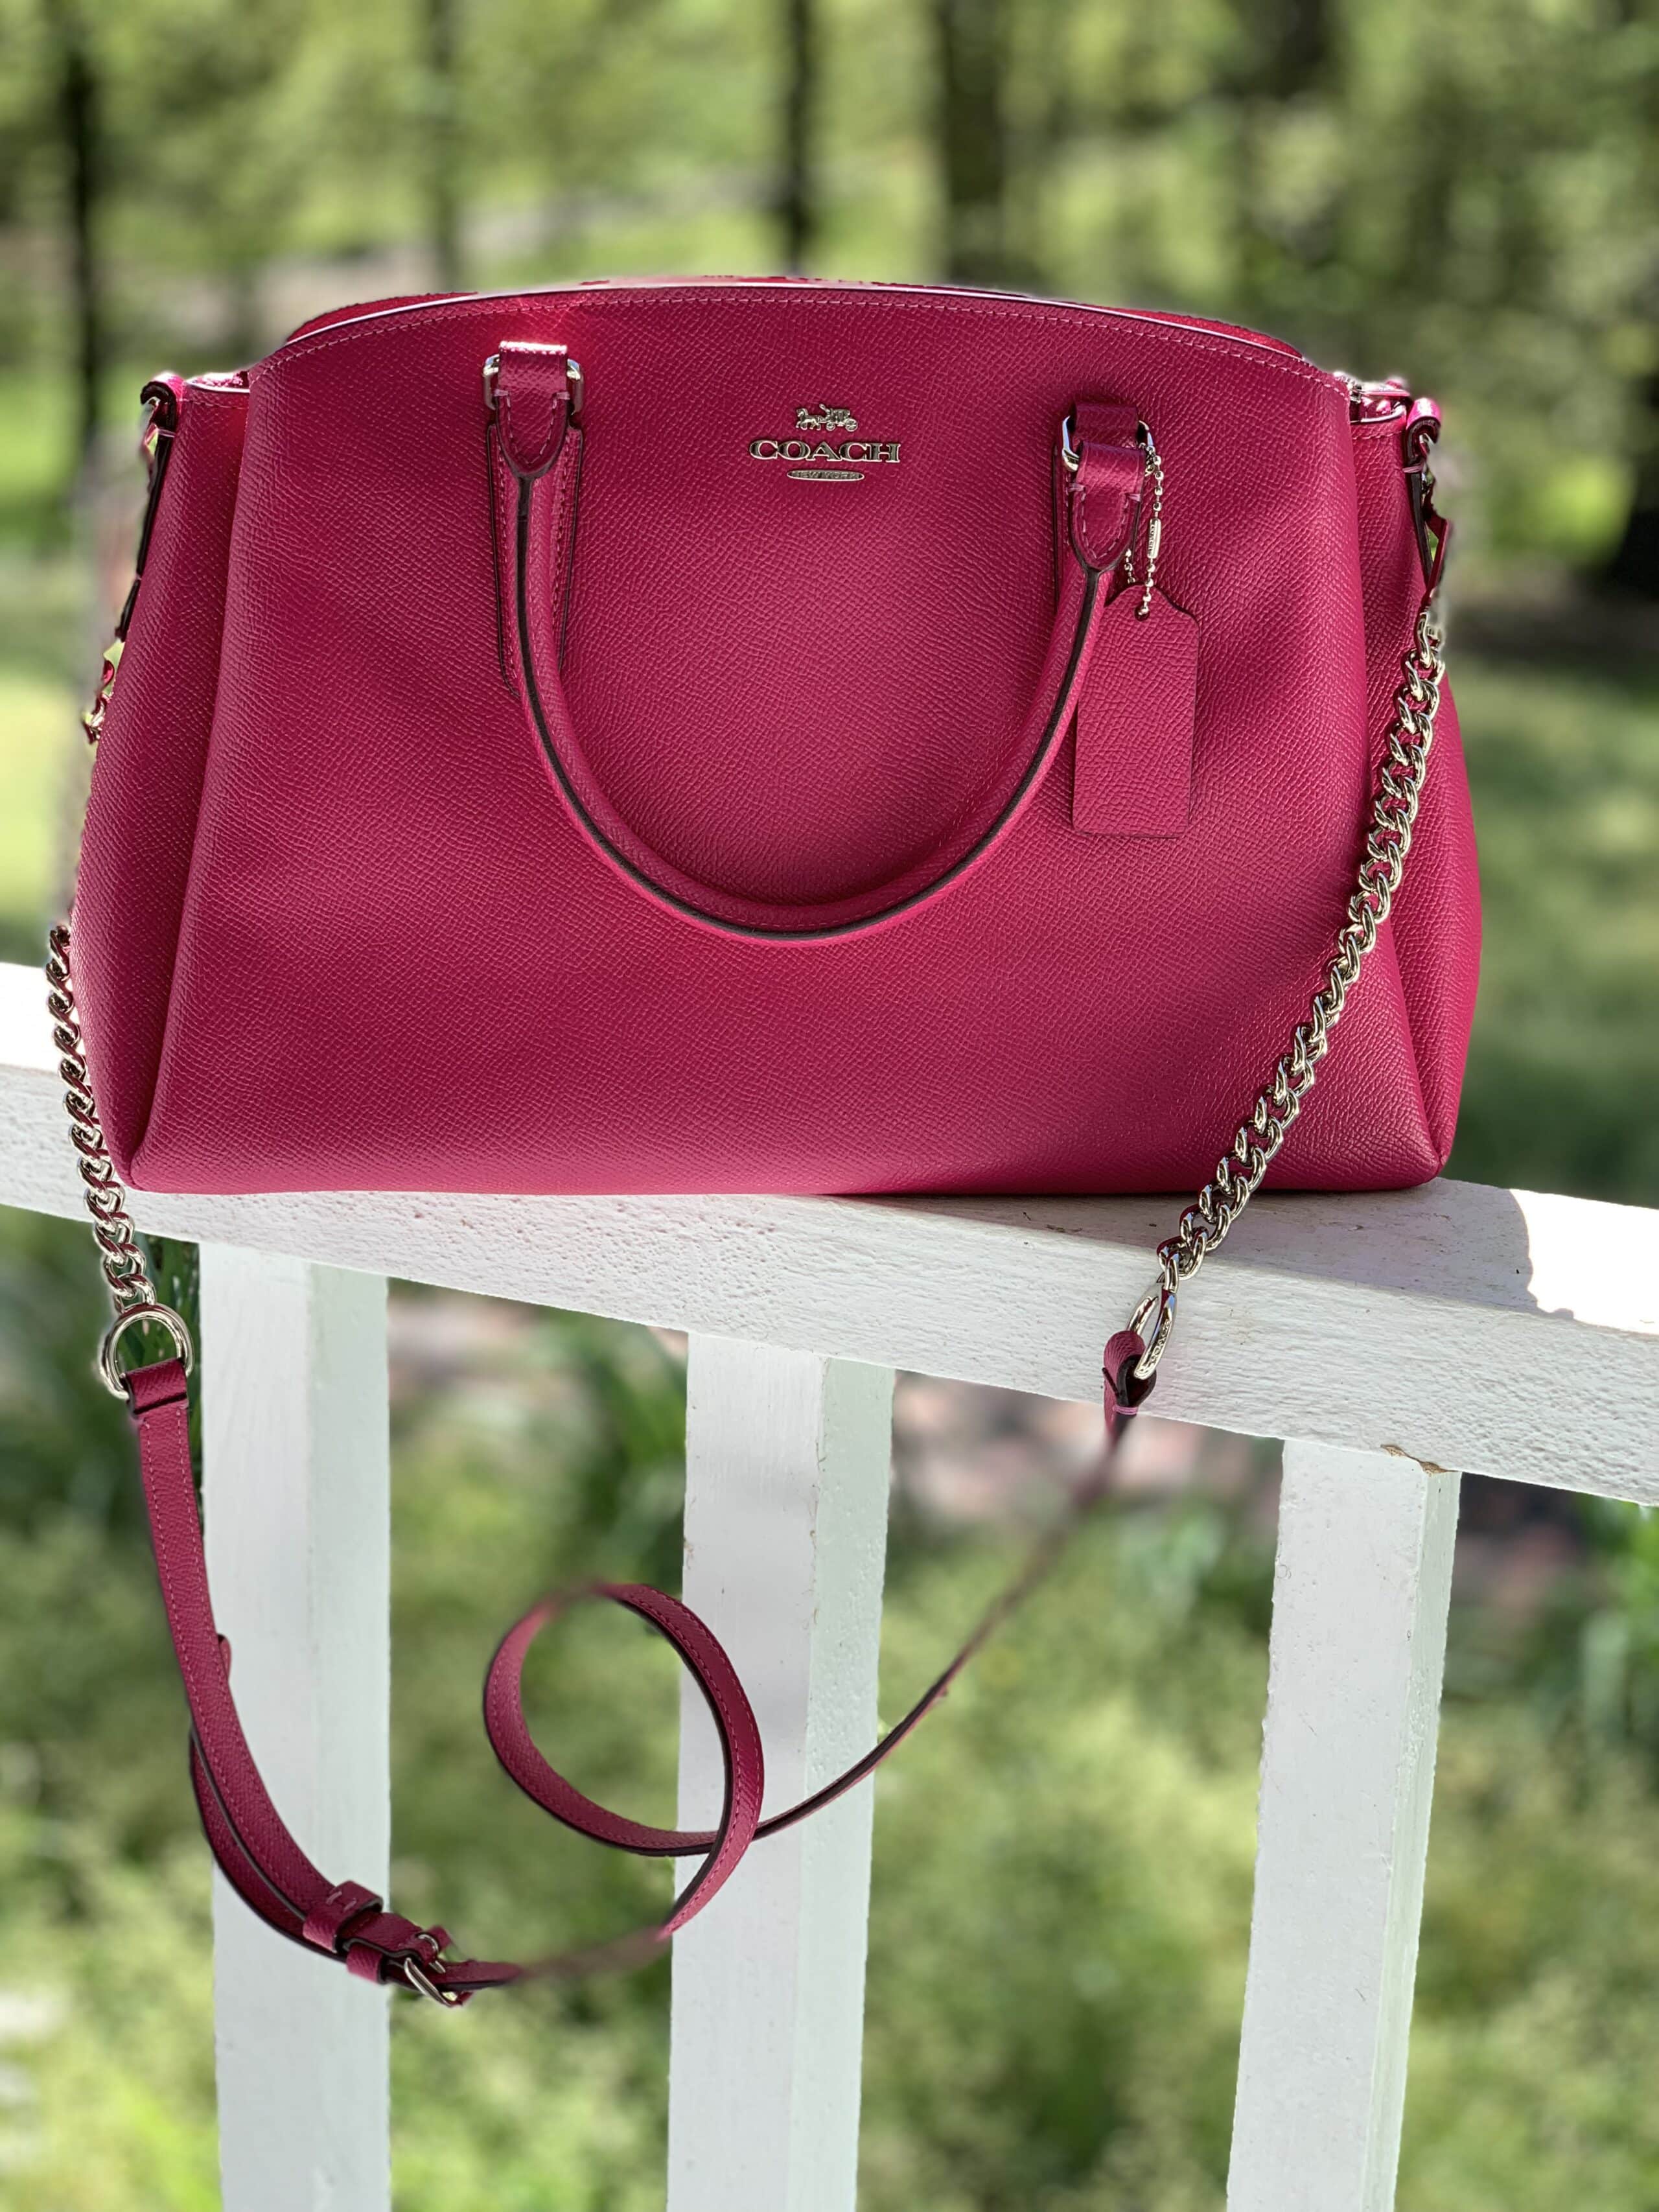 Win This Gorgeous Hot Pink Coach Sage Carryall